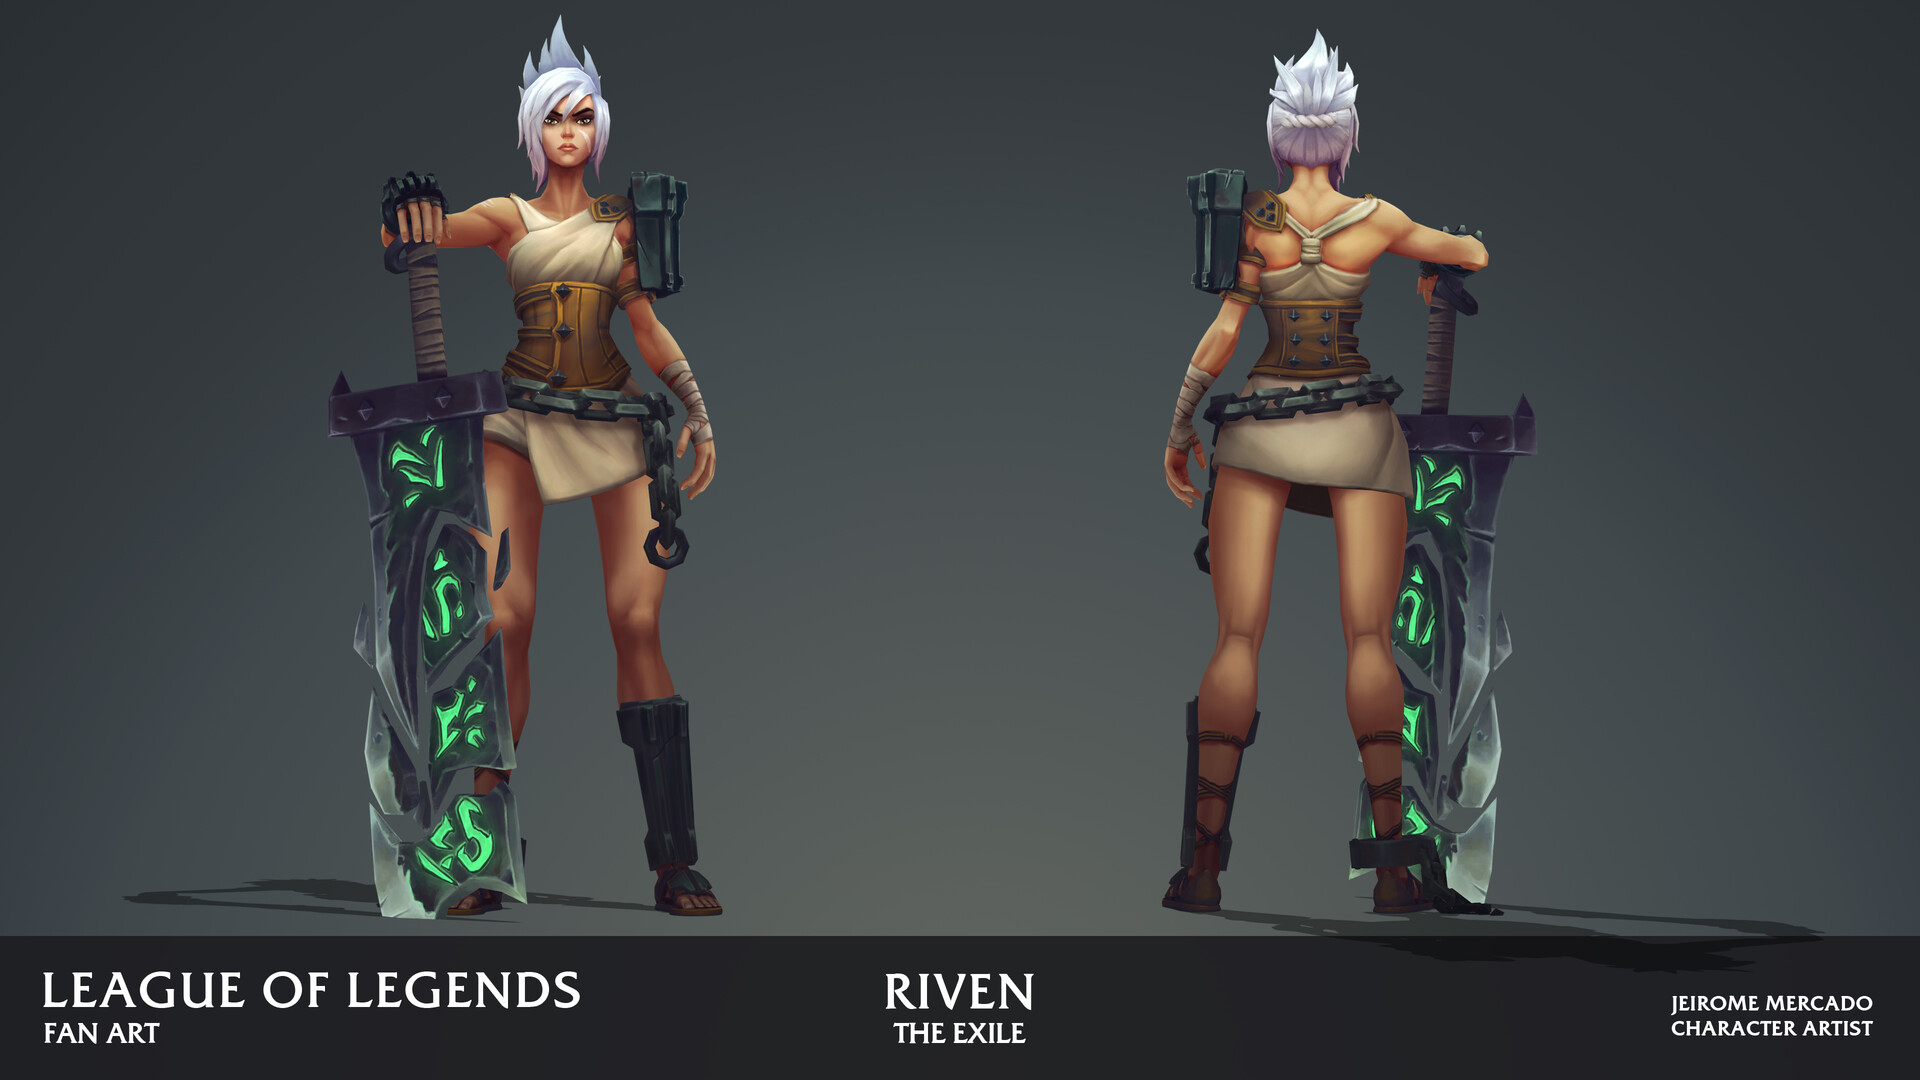 Riven, The Exile